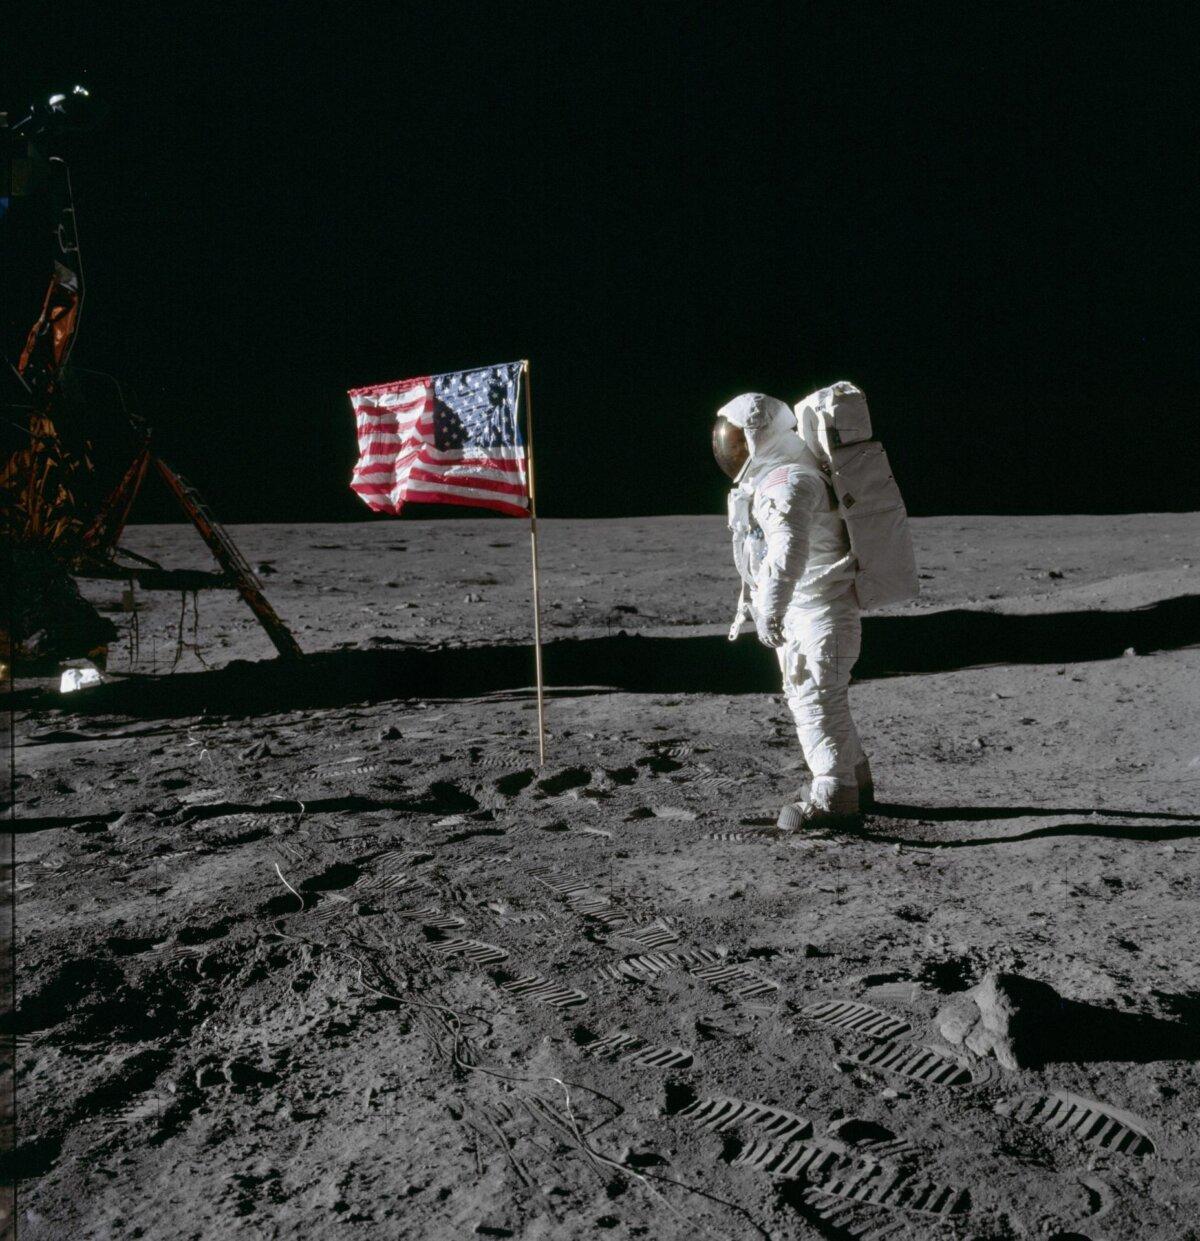 Buzz Aldrin landed on the moon during the Apollo 11 mission in 1969. (NASA)